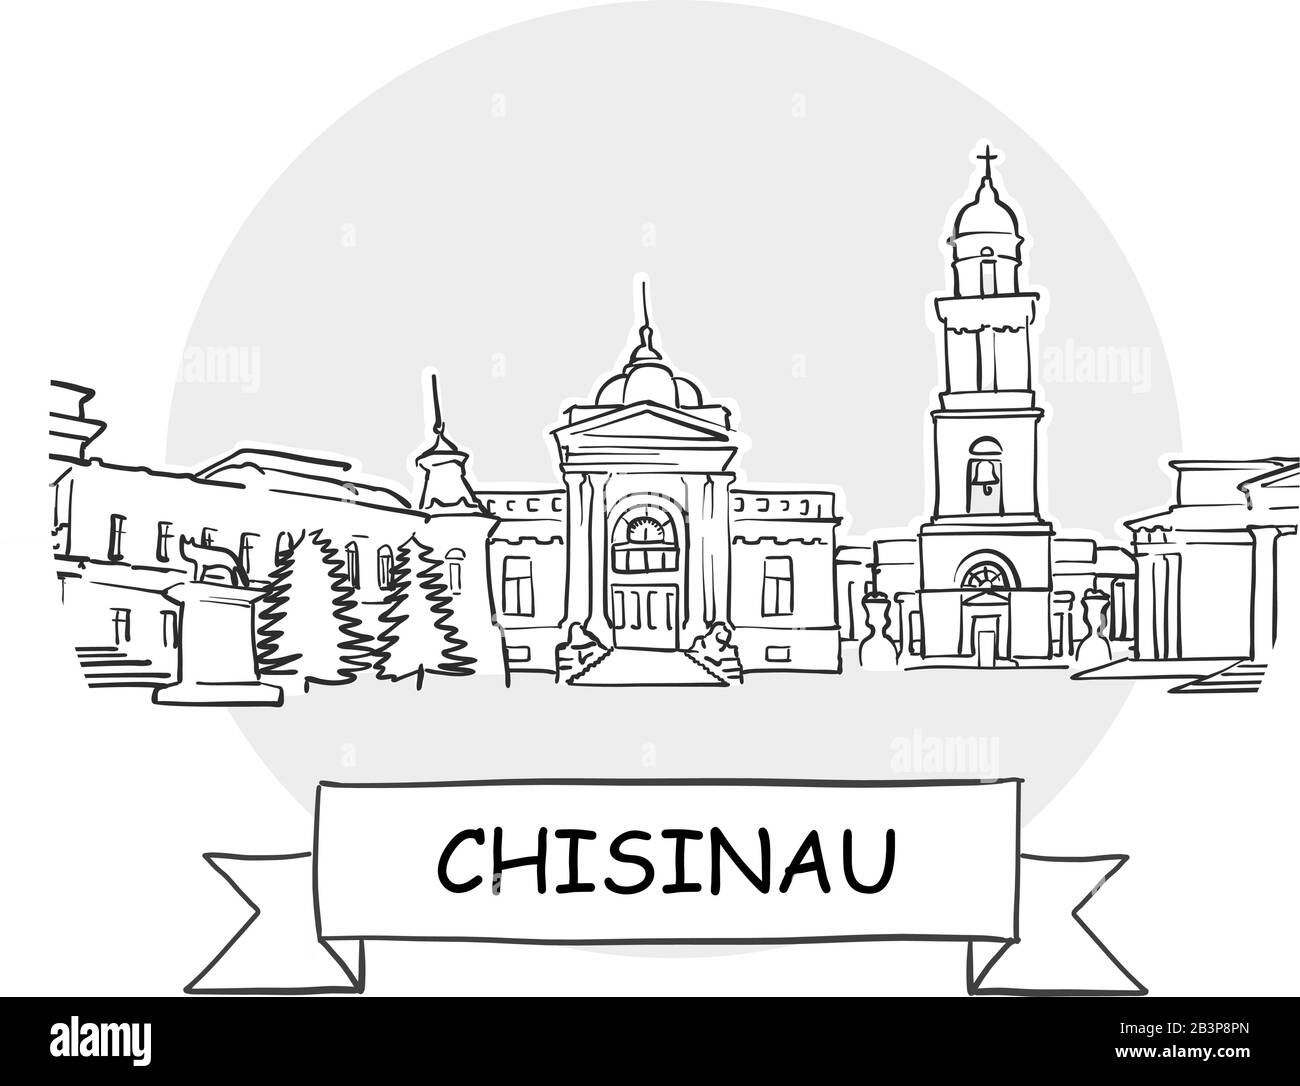 Chisinau Cityscape Vector Sign. Line Art Illustration with Ribbon and ...